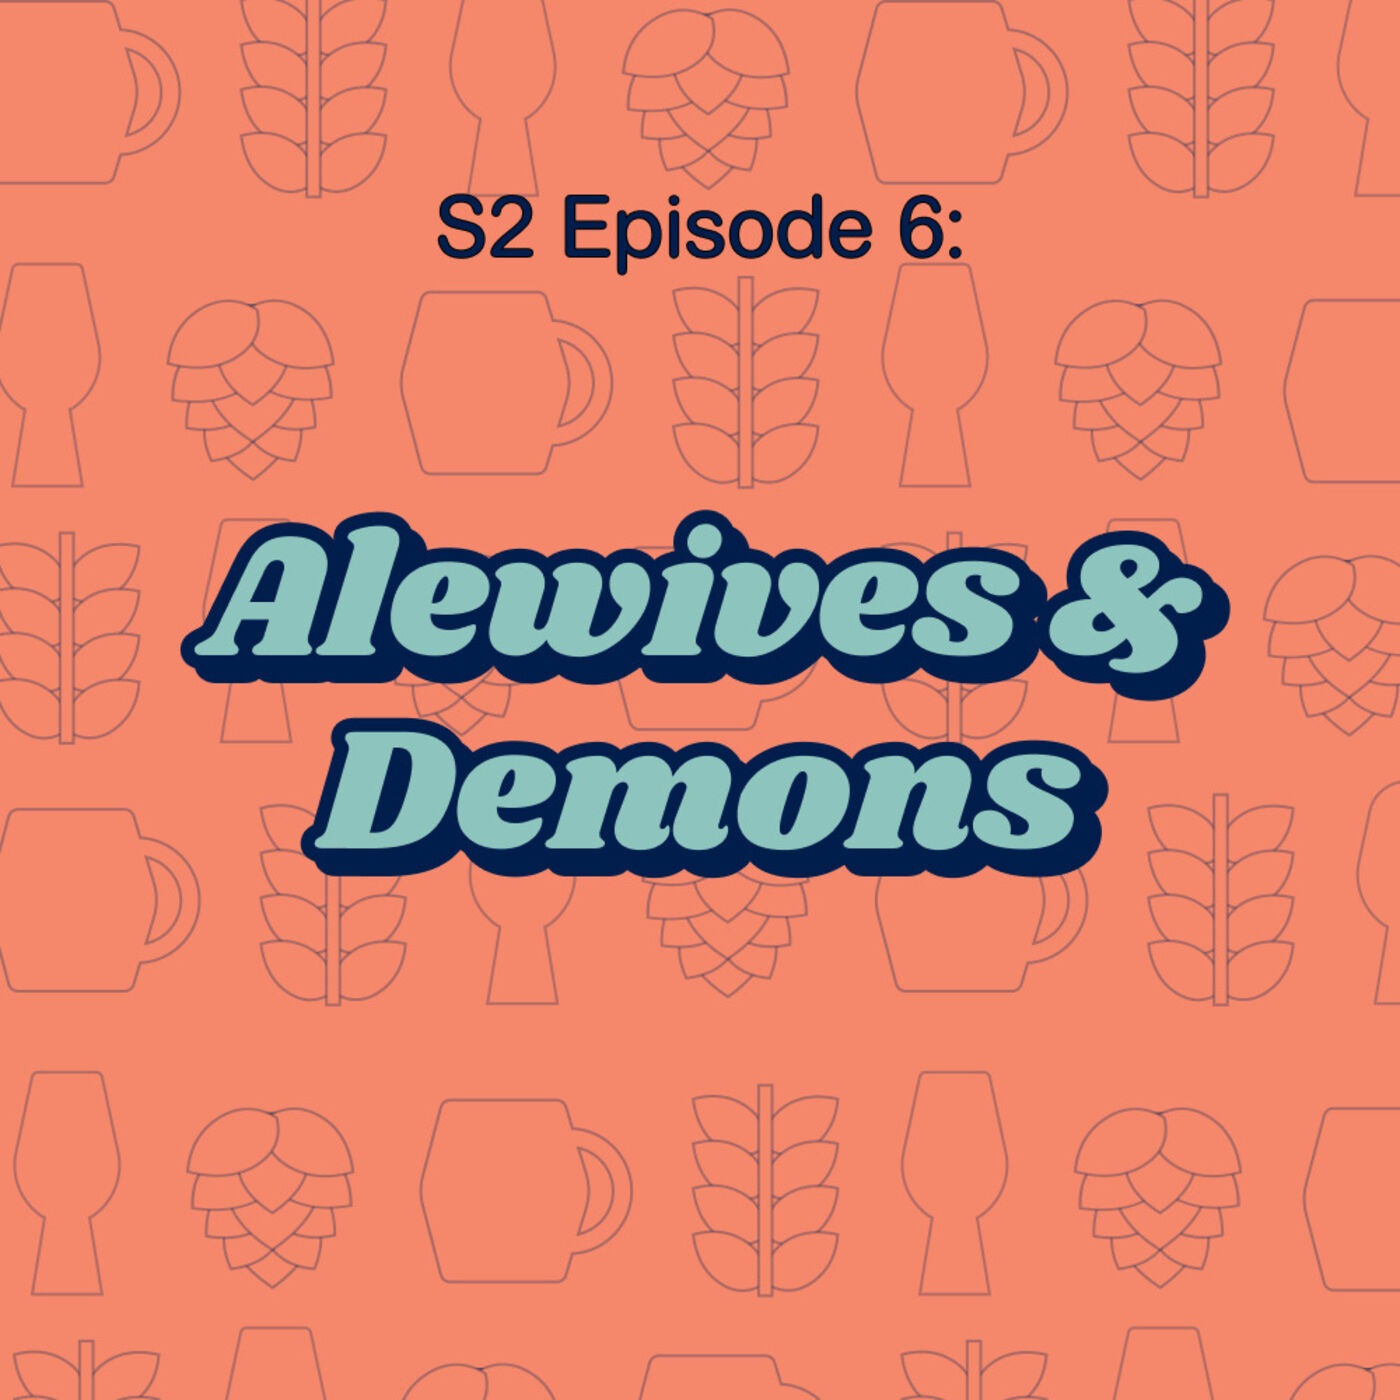 Alewives and Demons